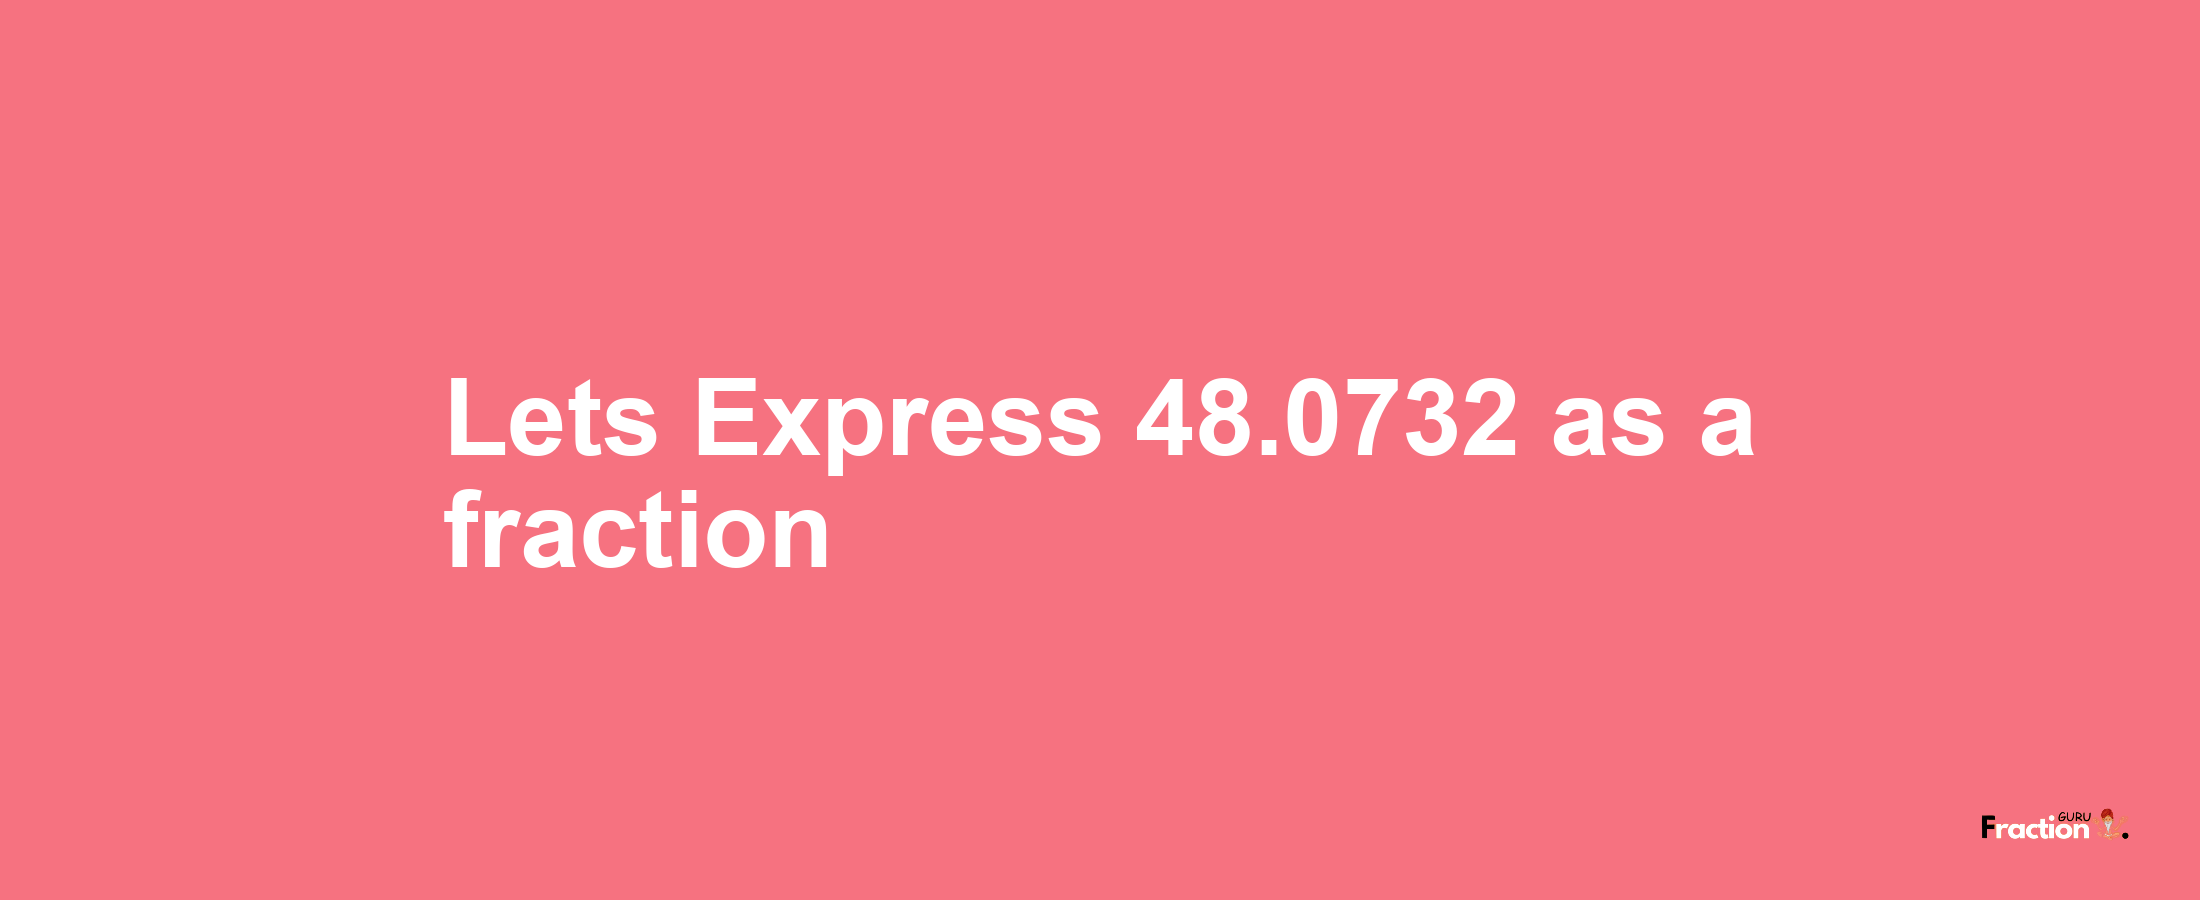 Lets Express 48.0732 as afraction